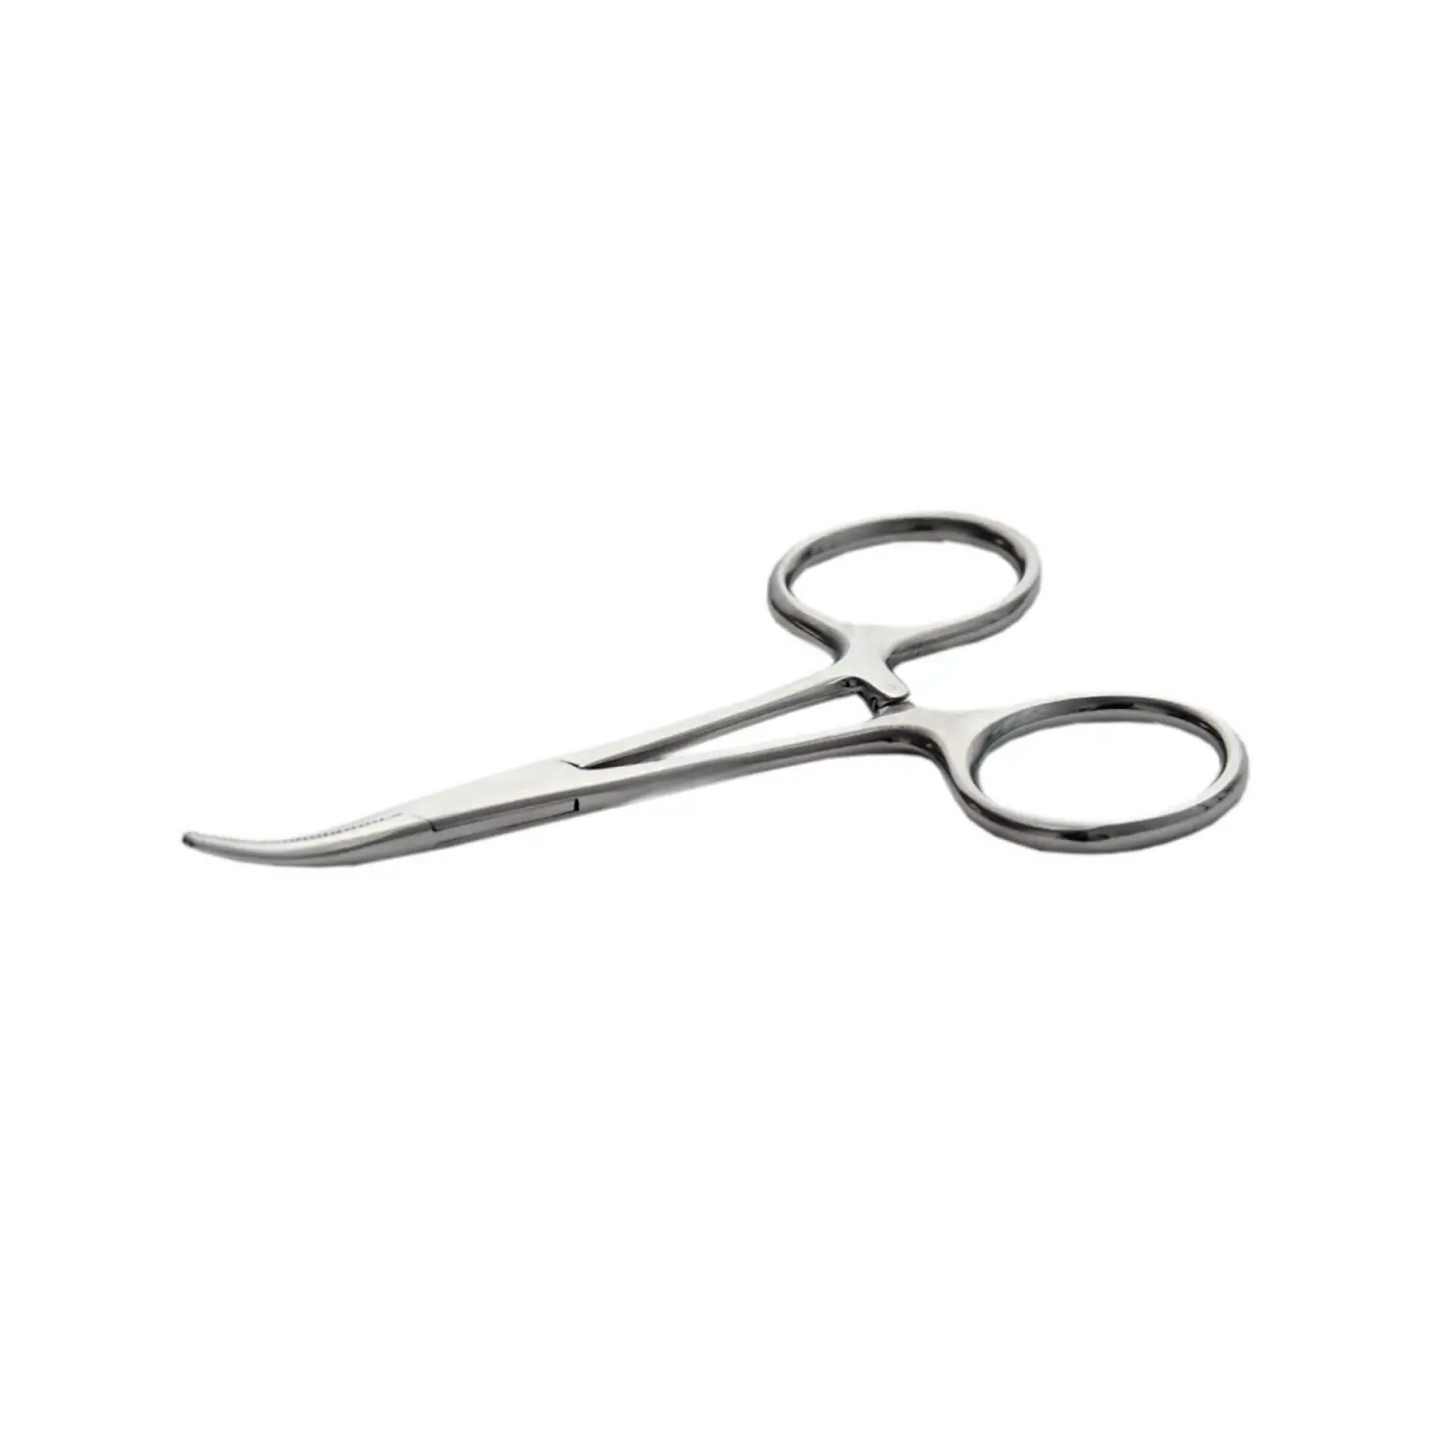 Exclusive 3.5 inches Curved Hemostat (Mirror Finish) 100301